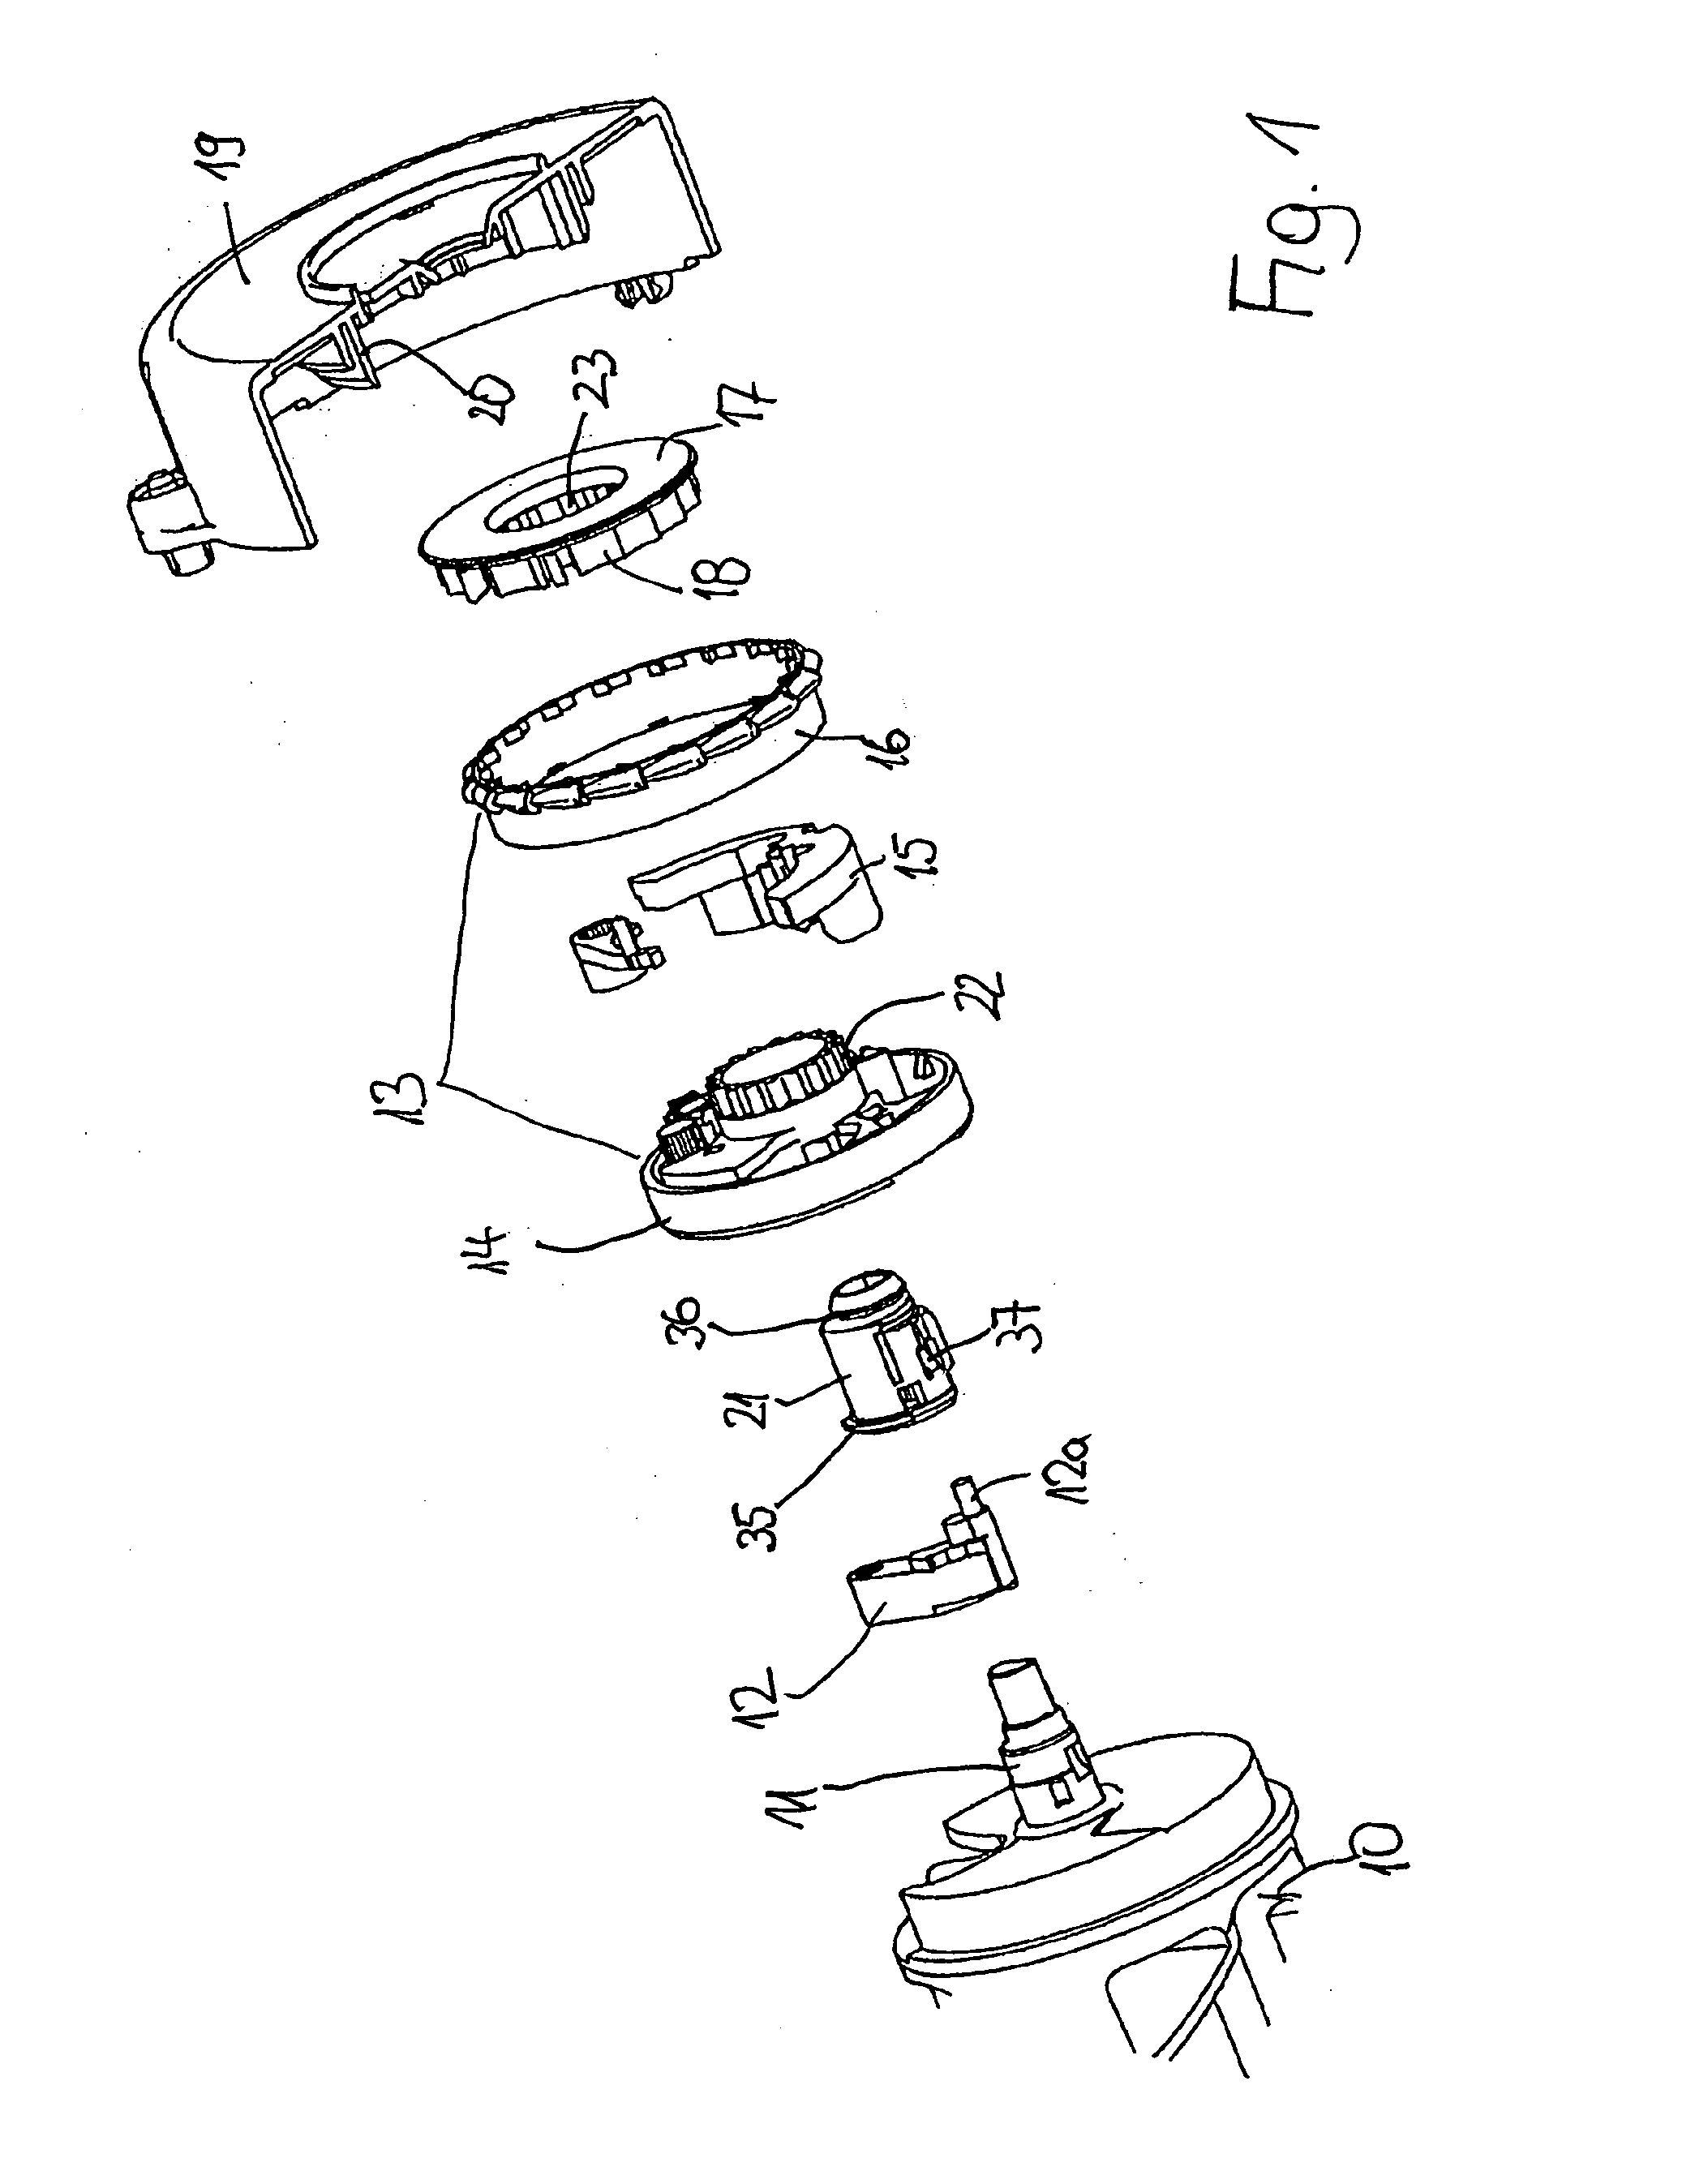 Safety belt retractor with cutoff of its belt-webbing-sensitive and its vehicle-sensitive control system